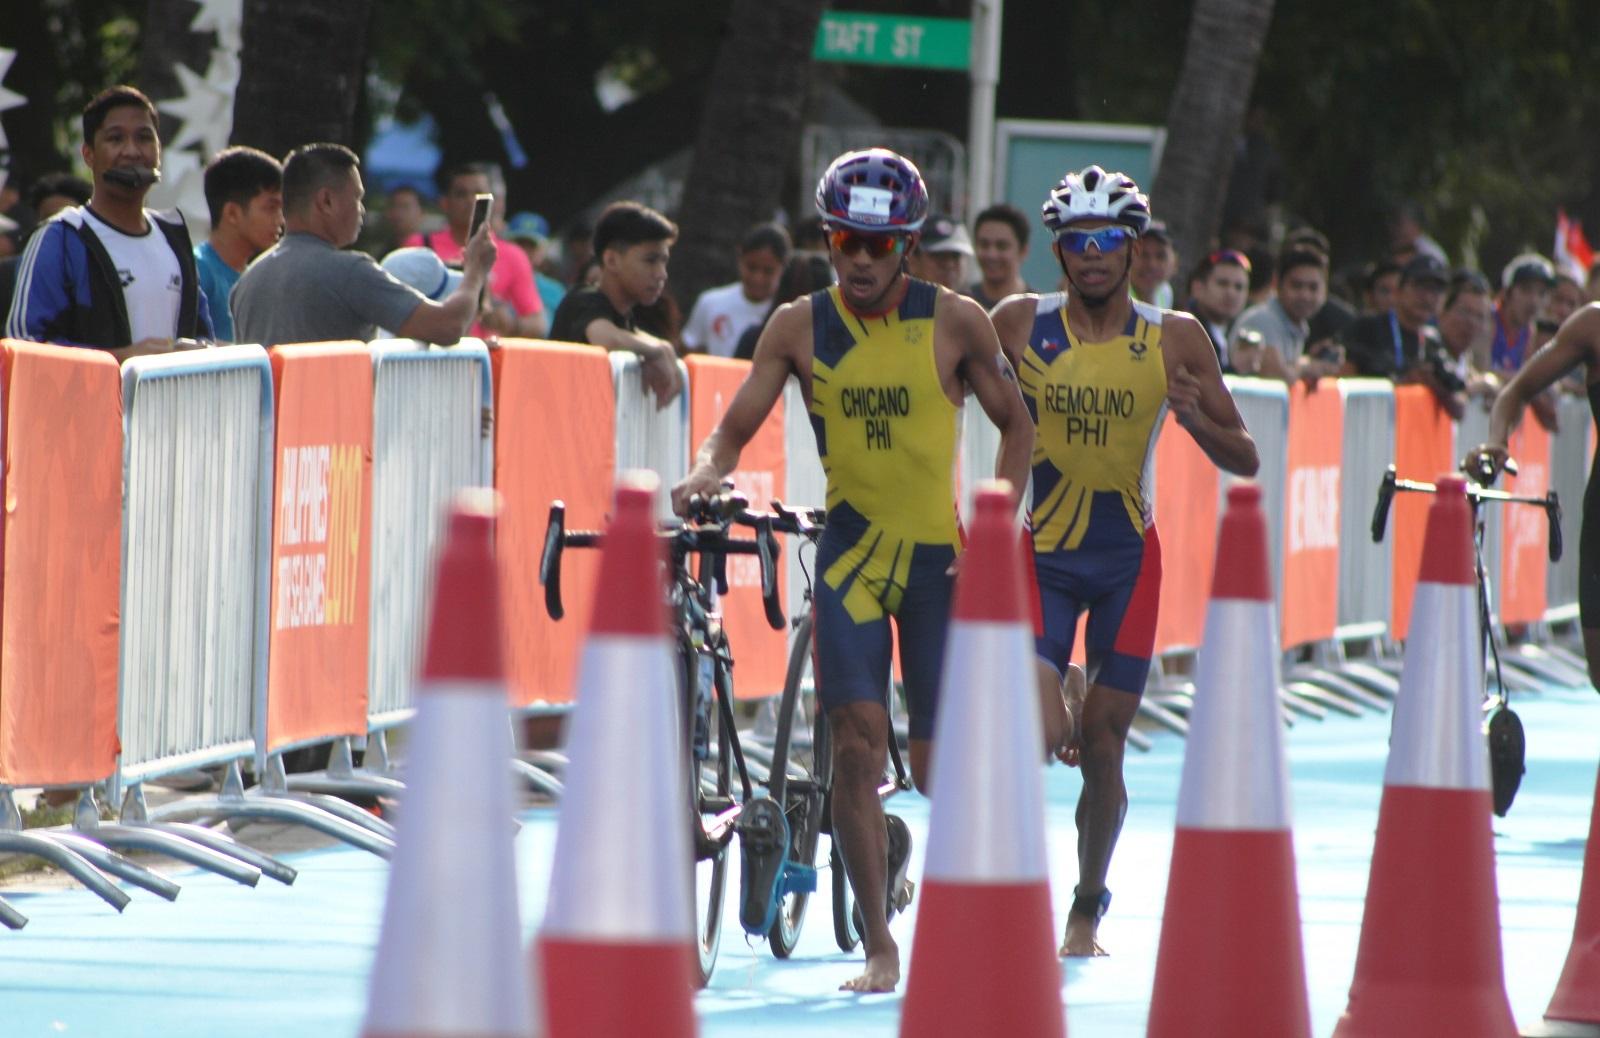 John "Rambo" Chicano and Kim Remolino finished first and second, respectively, in the men's triathlon event. 